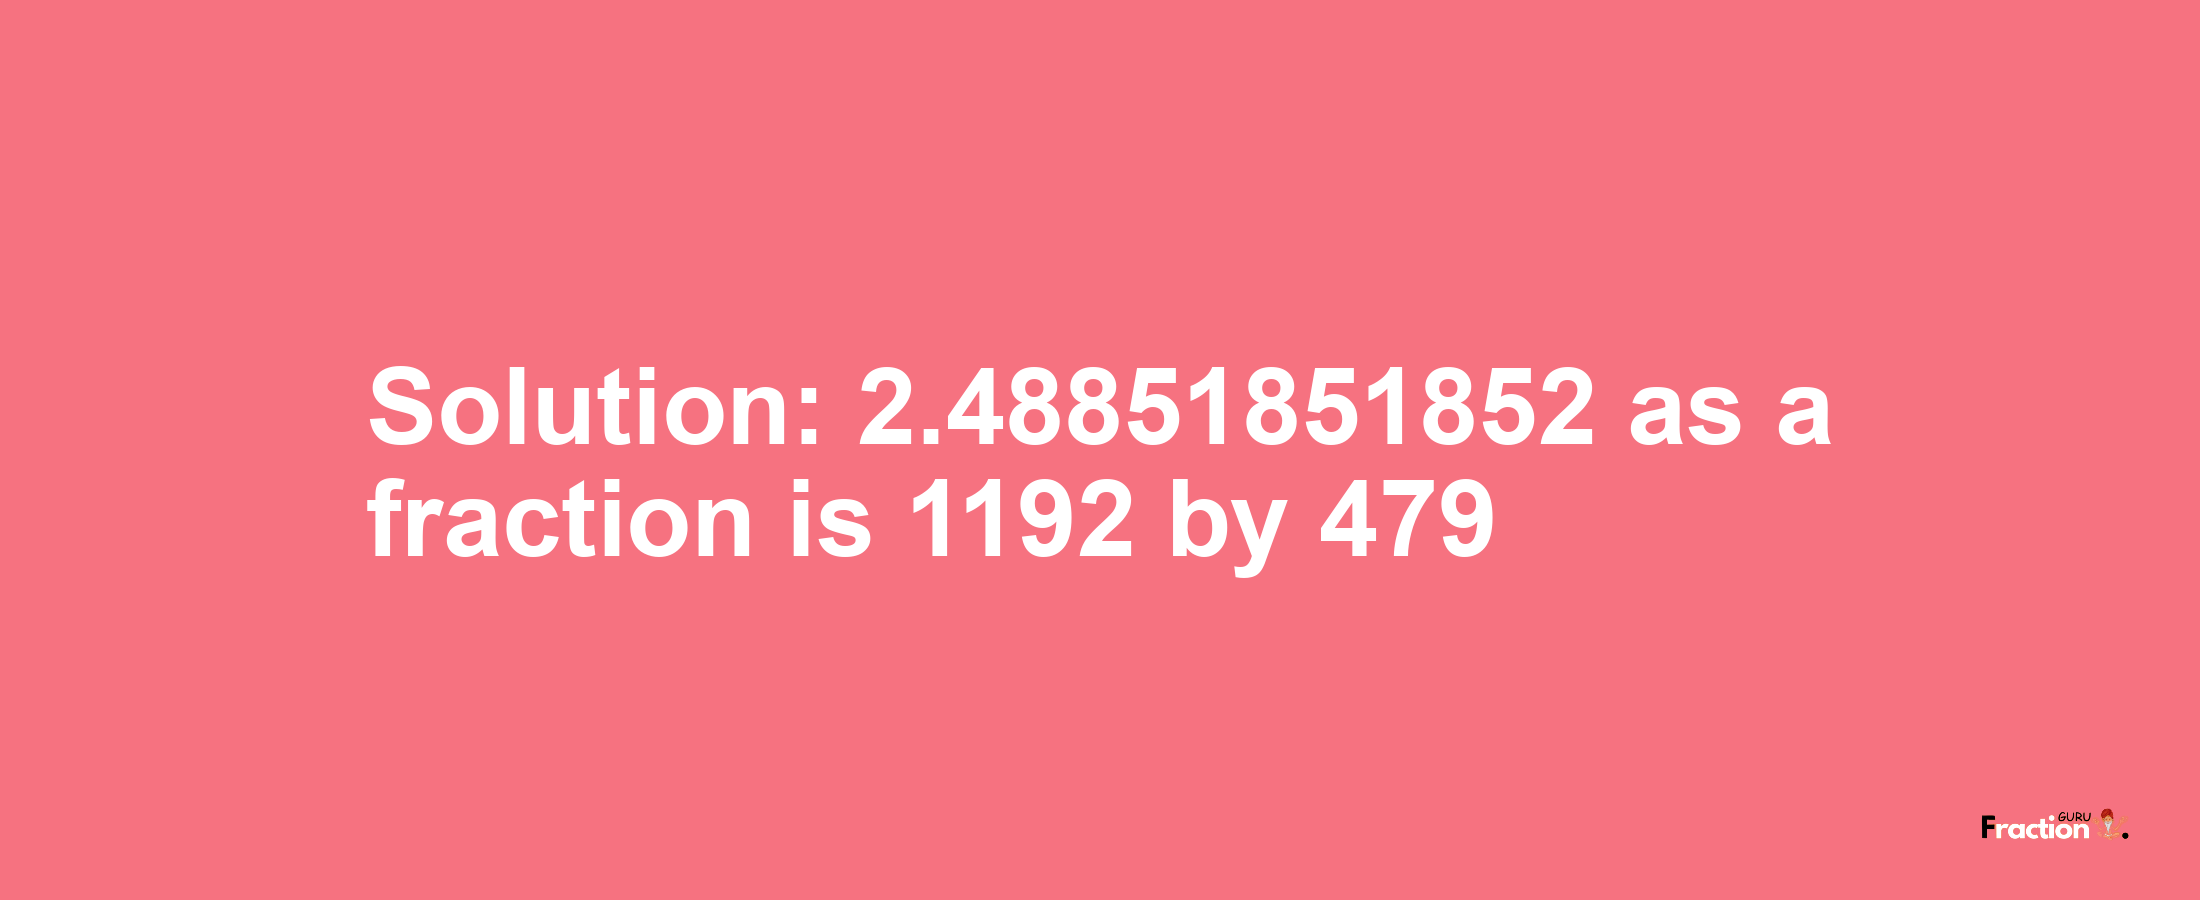 Solution:2.48851851852 as a fraction is 1192/479